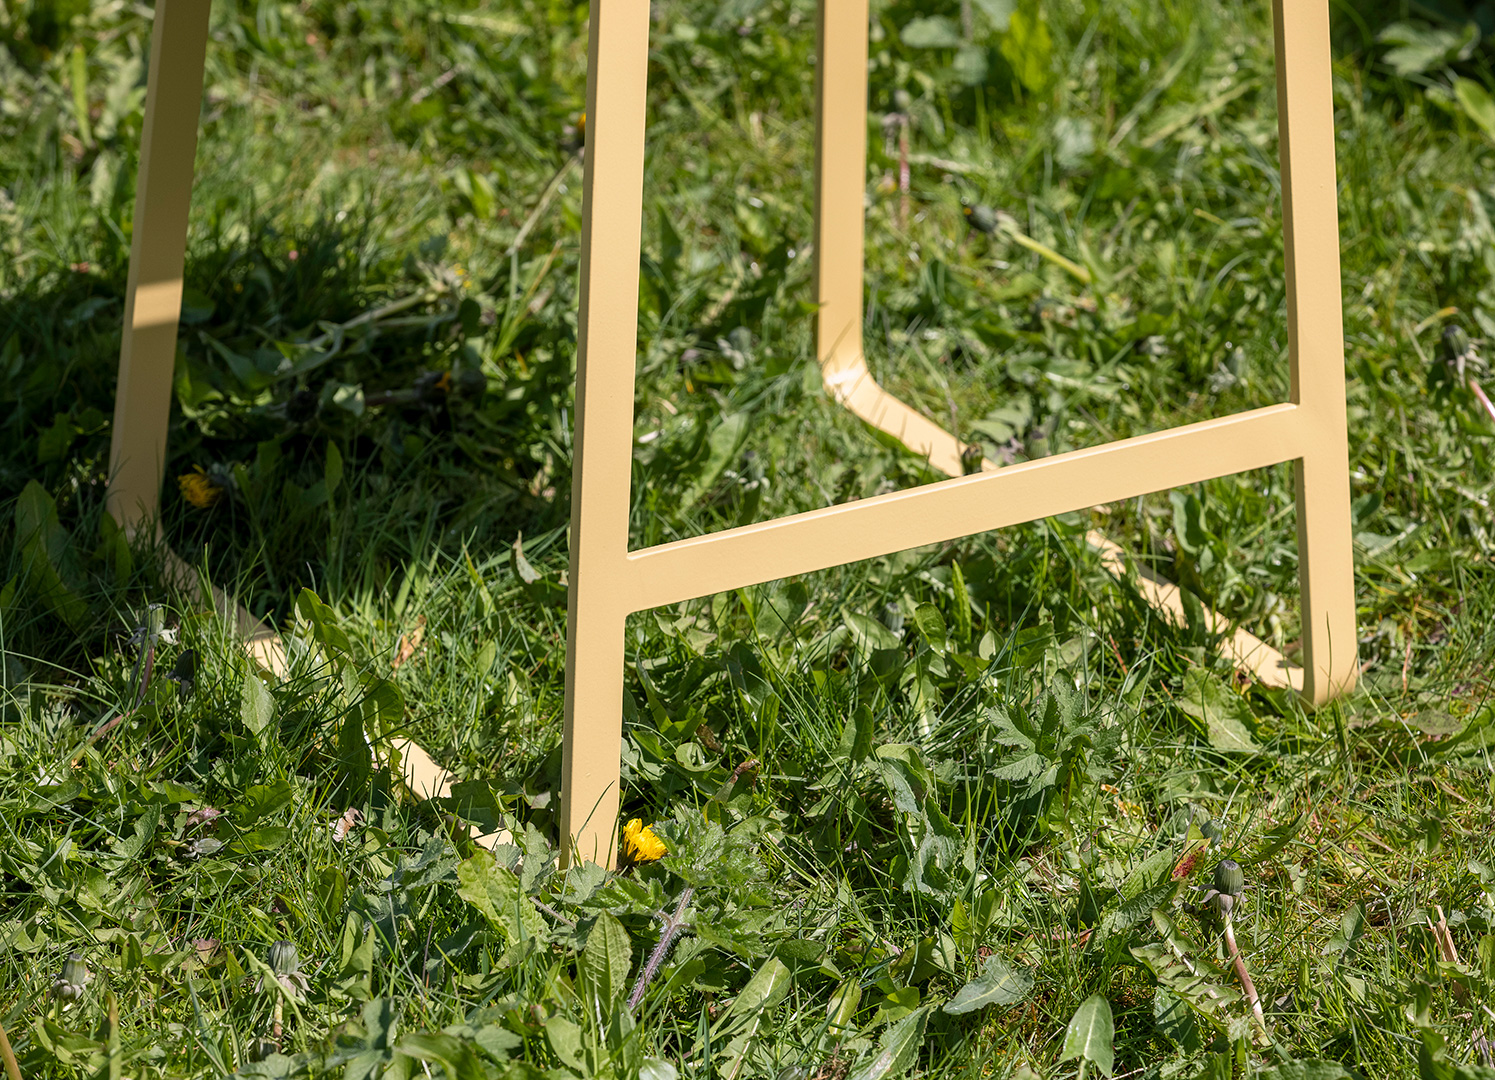 A cross bar works as a foot rest on the TERÄS stool